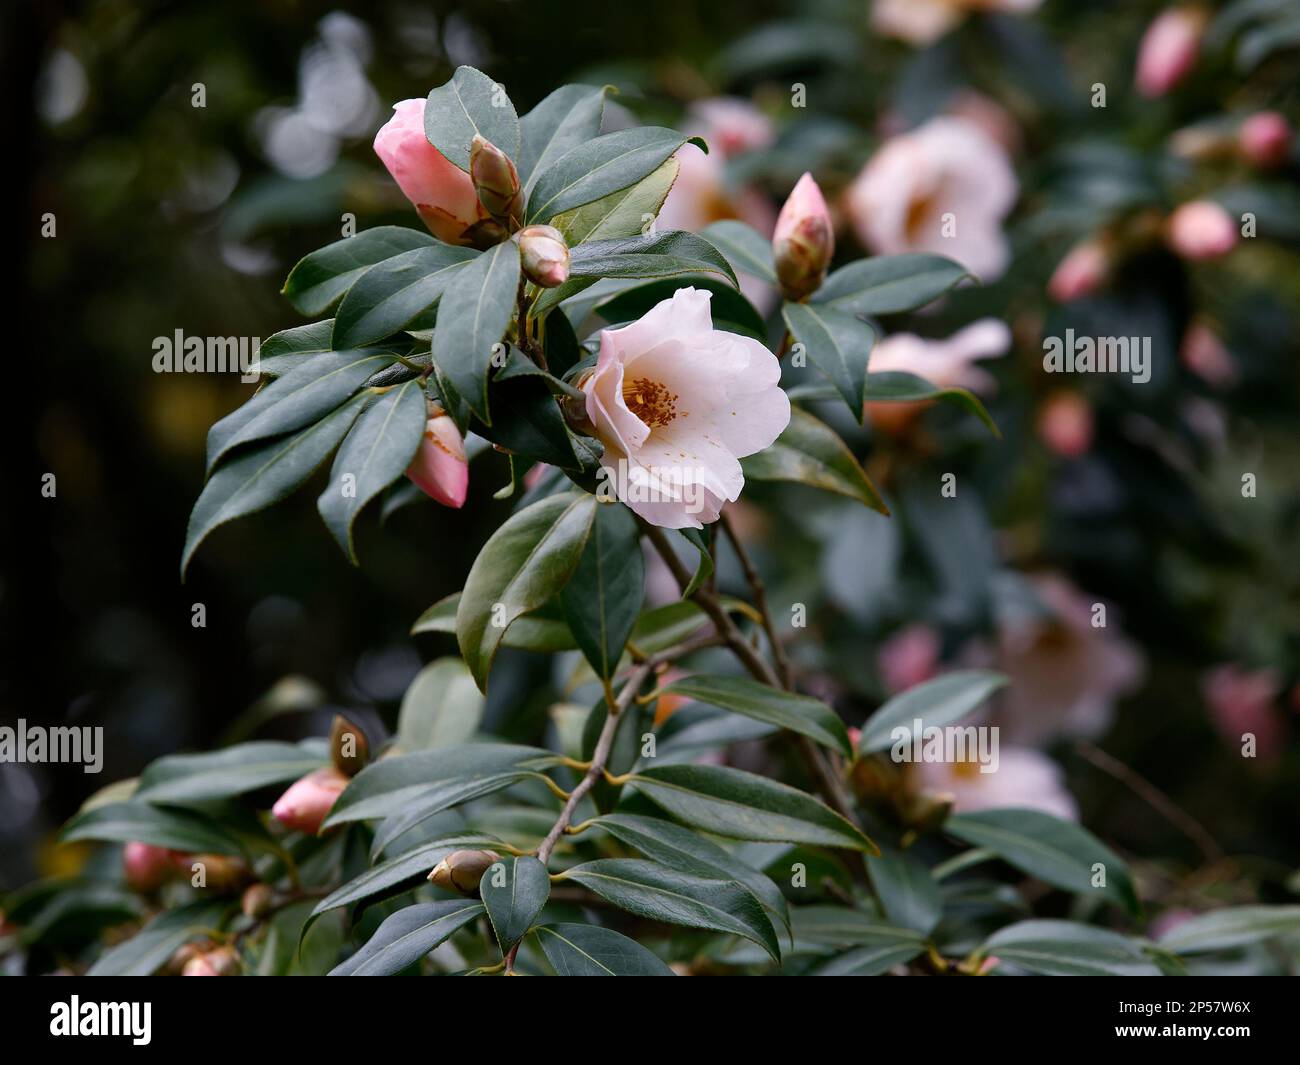 Closeup of the winter flowers of the evergreen garden plant Camellia x williamsii Hiraethlyn. Stock Photo